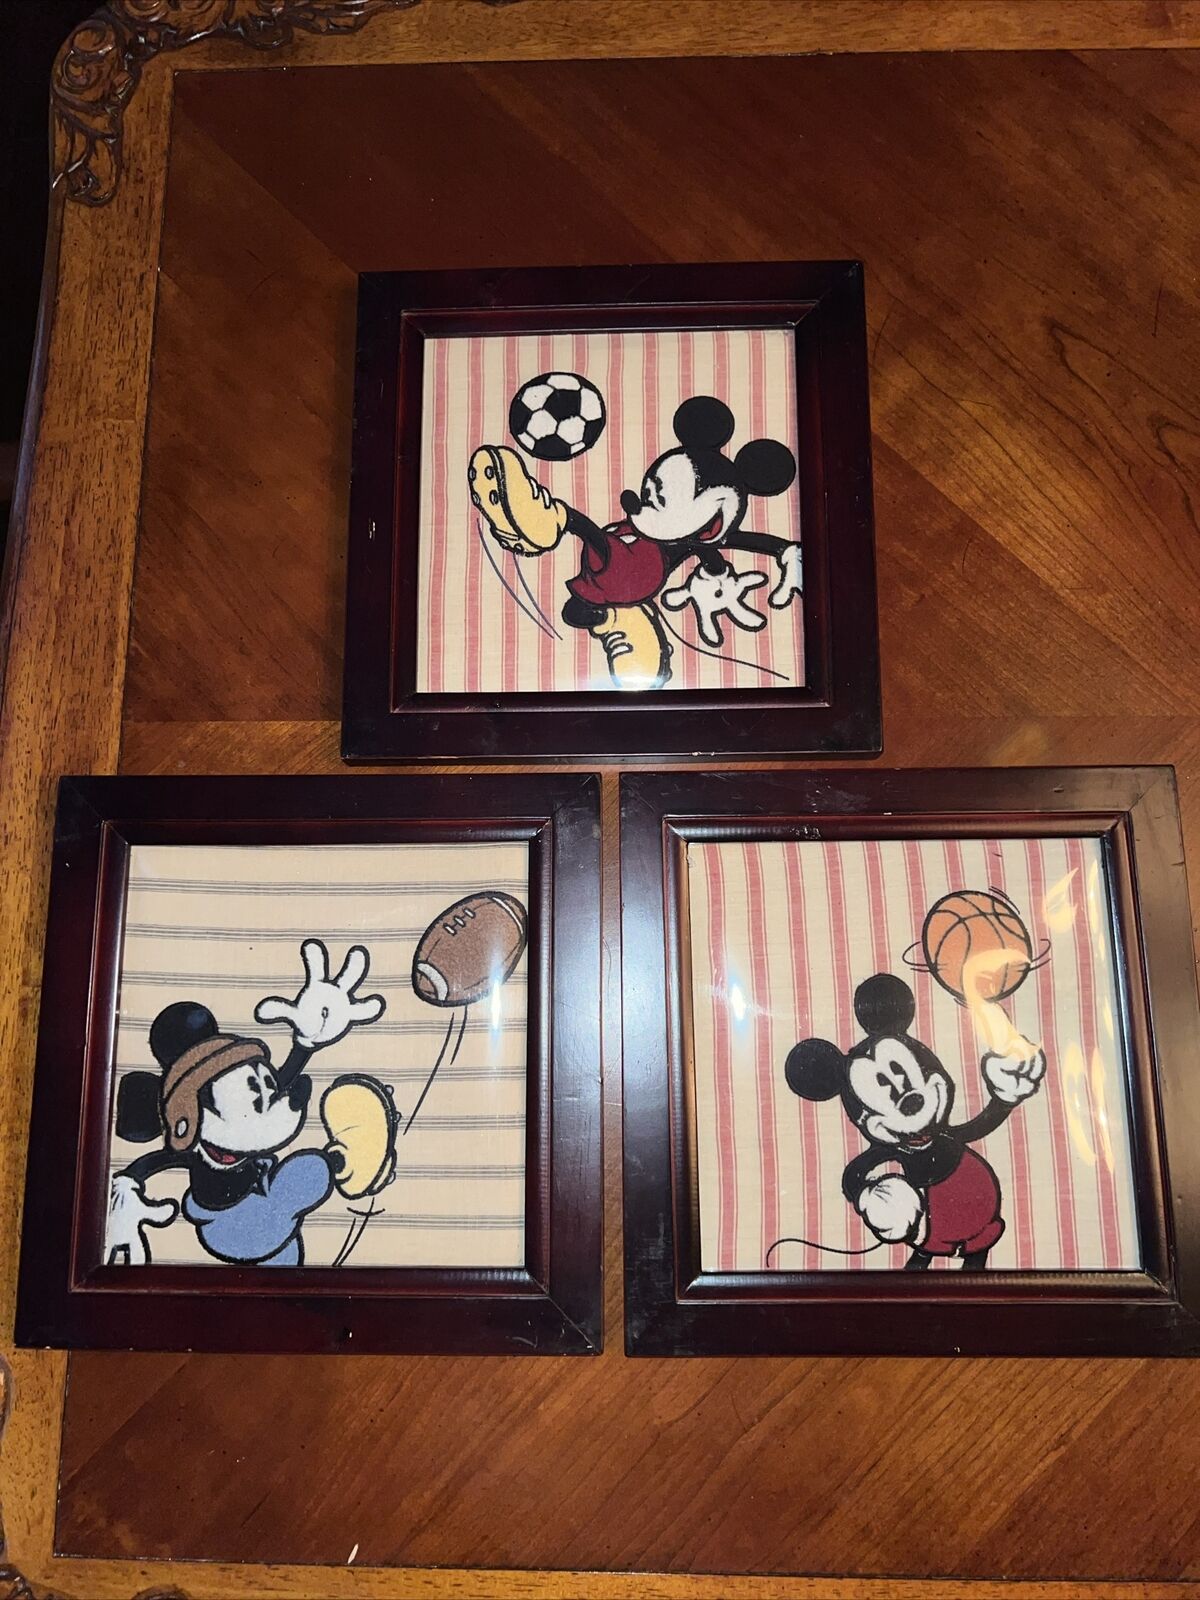 3 Vintage Disney Framed Mickey Mouse Embroiders Fabric Sports 3 Piece Wall Decor